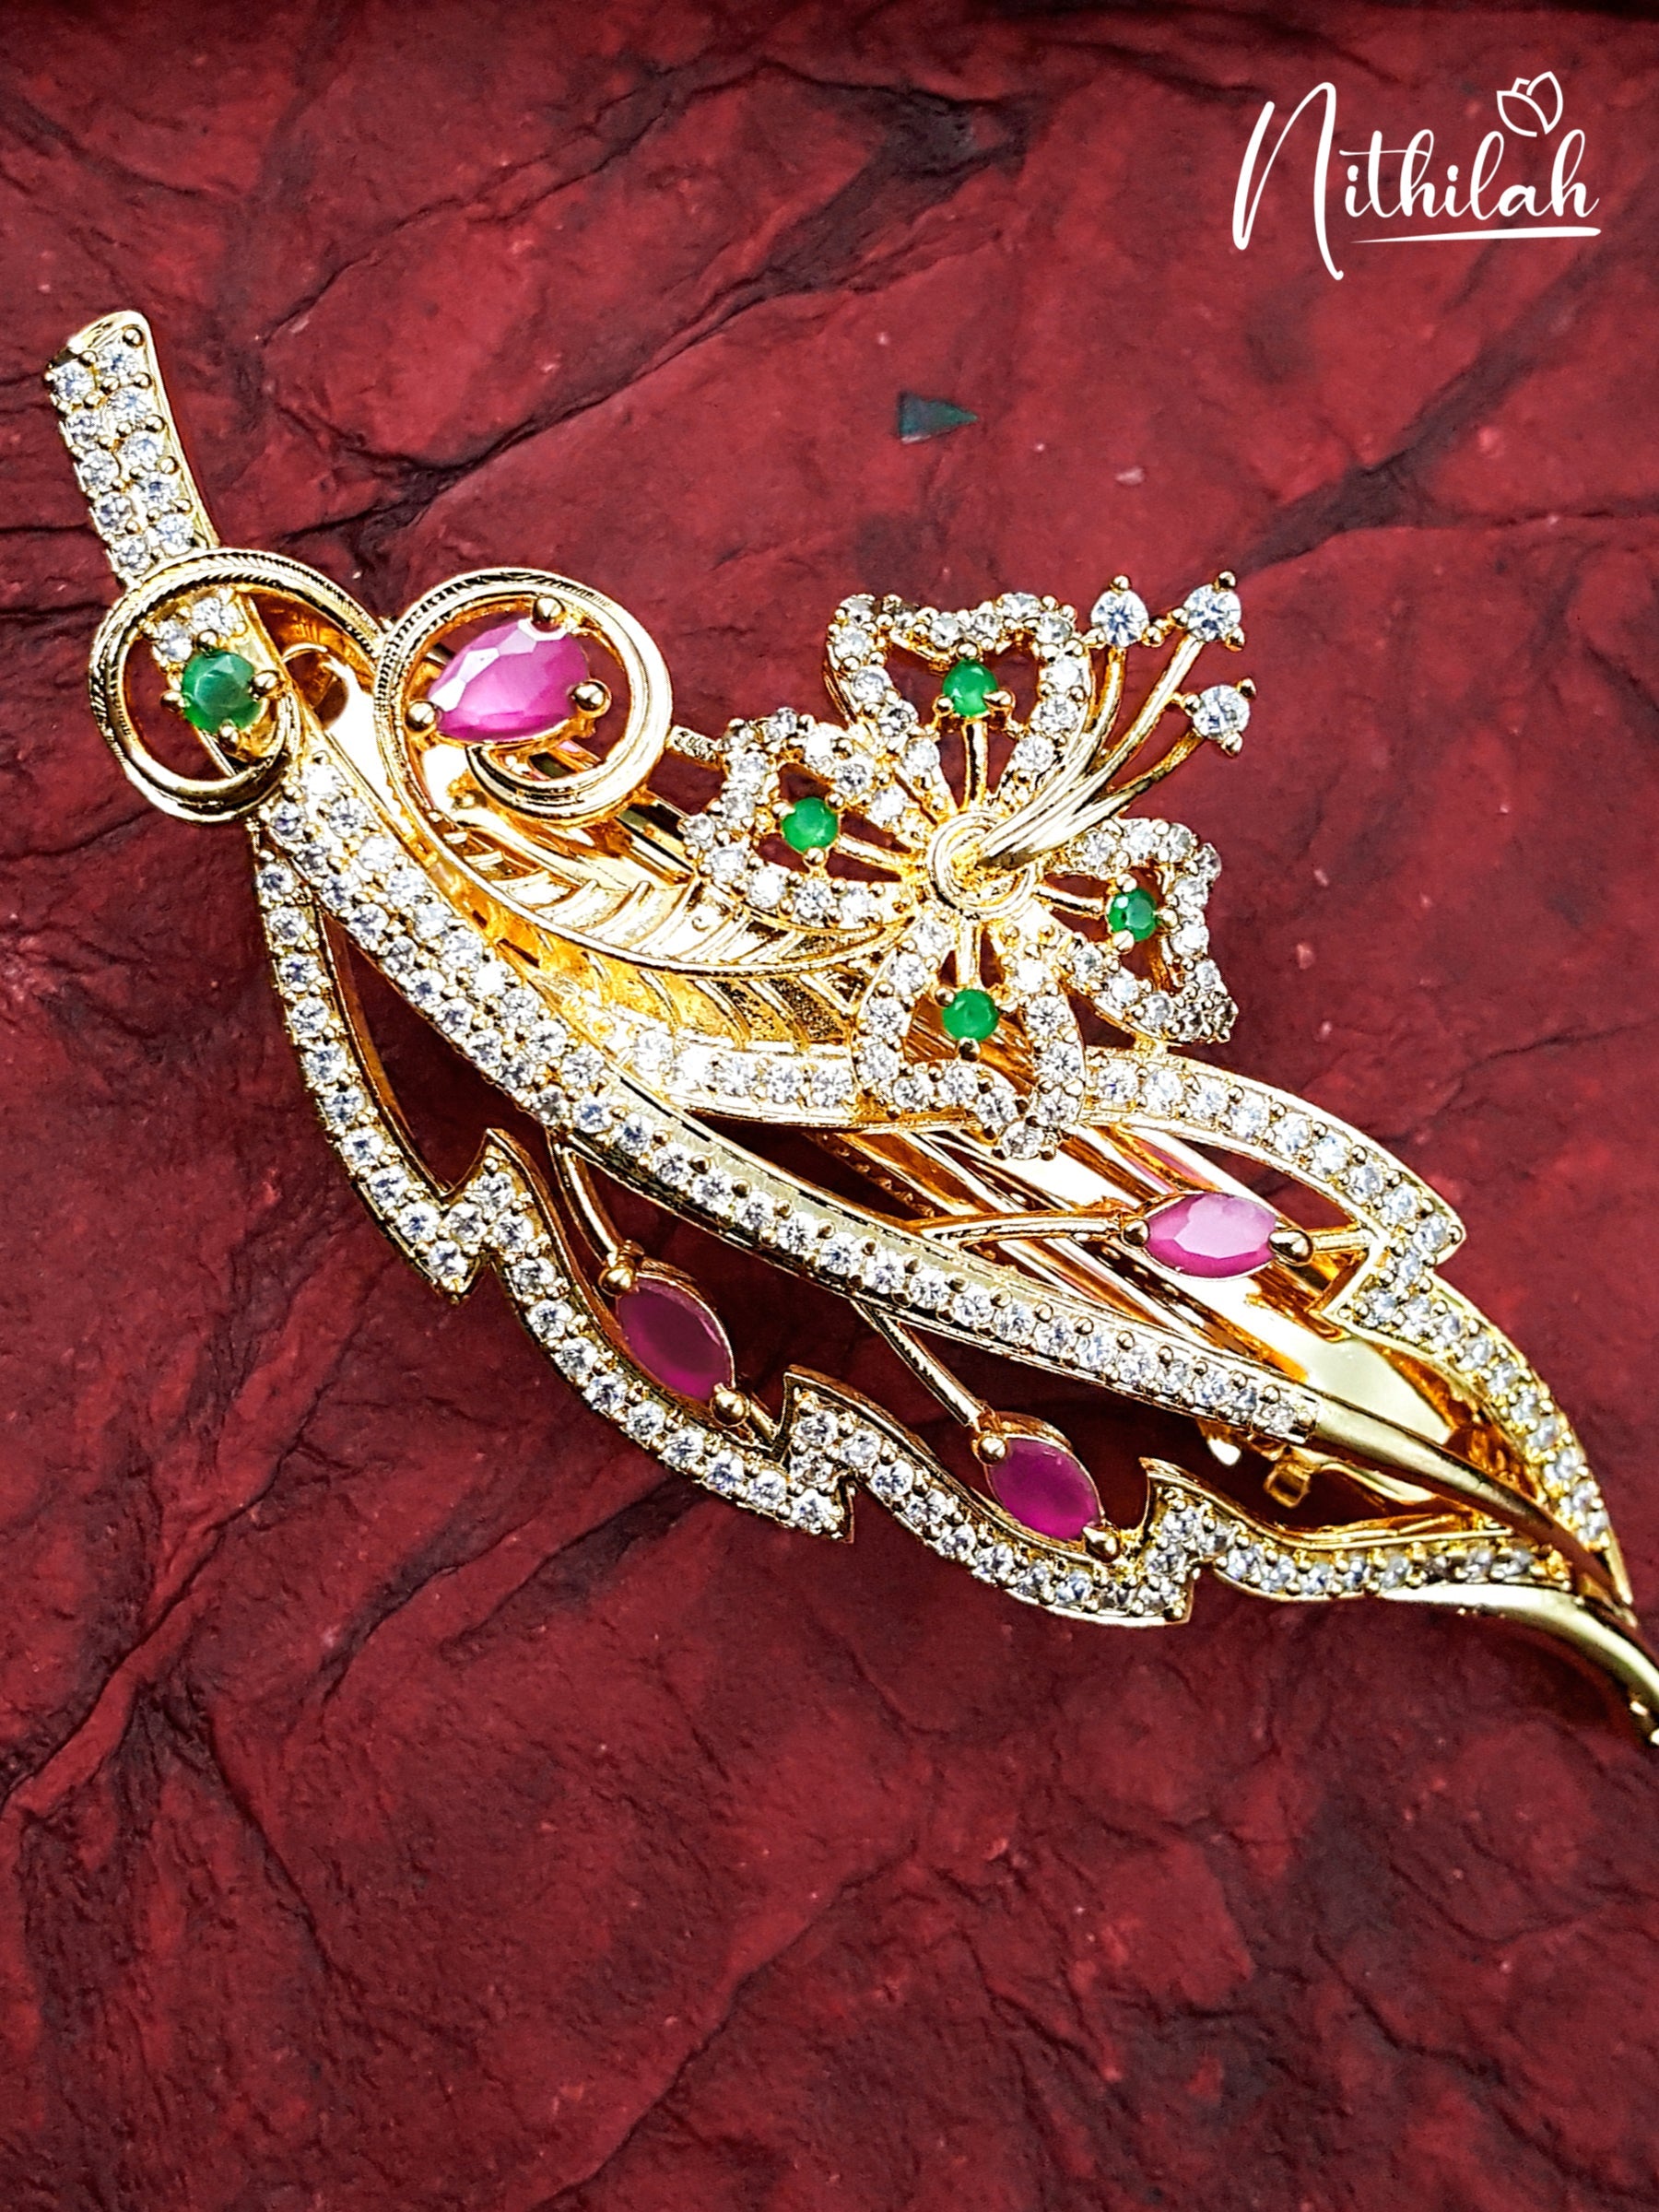 Nithilah AD Feather with Flower Hair Brooch Clip Gold